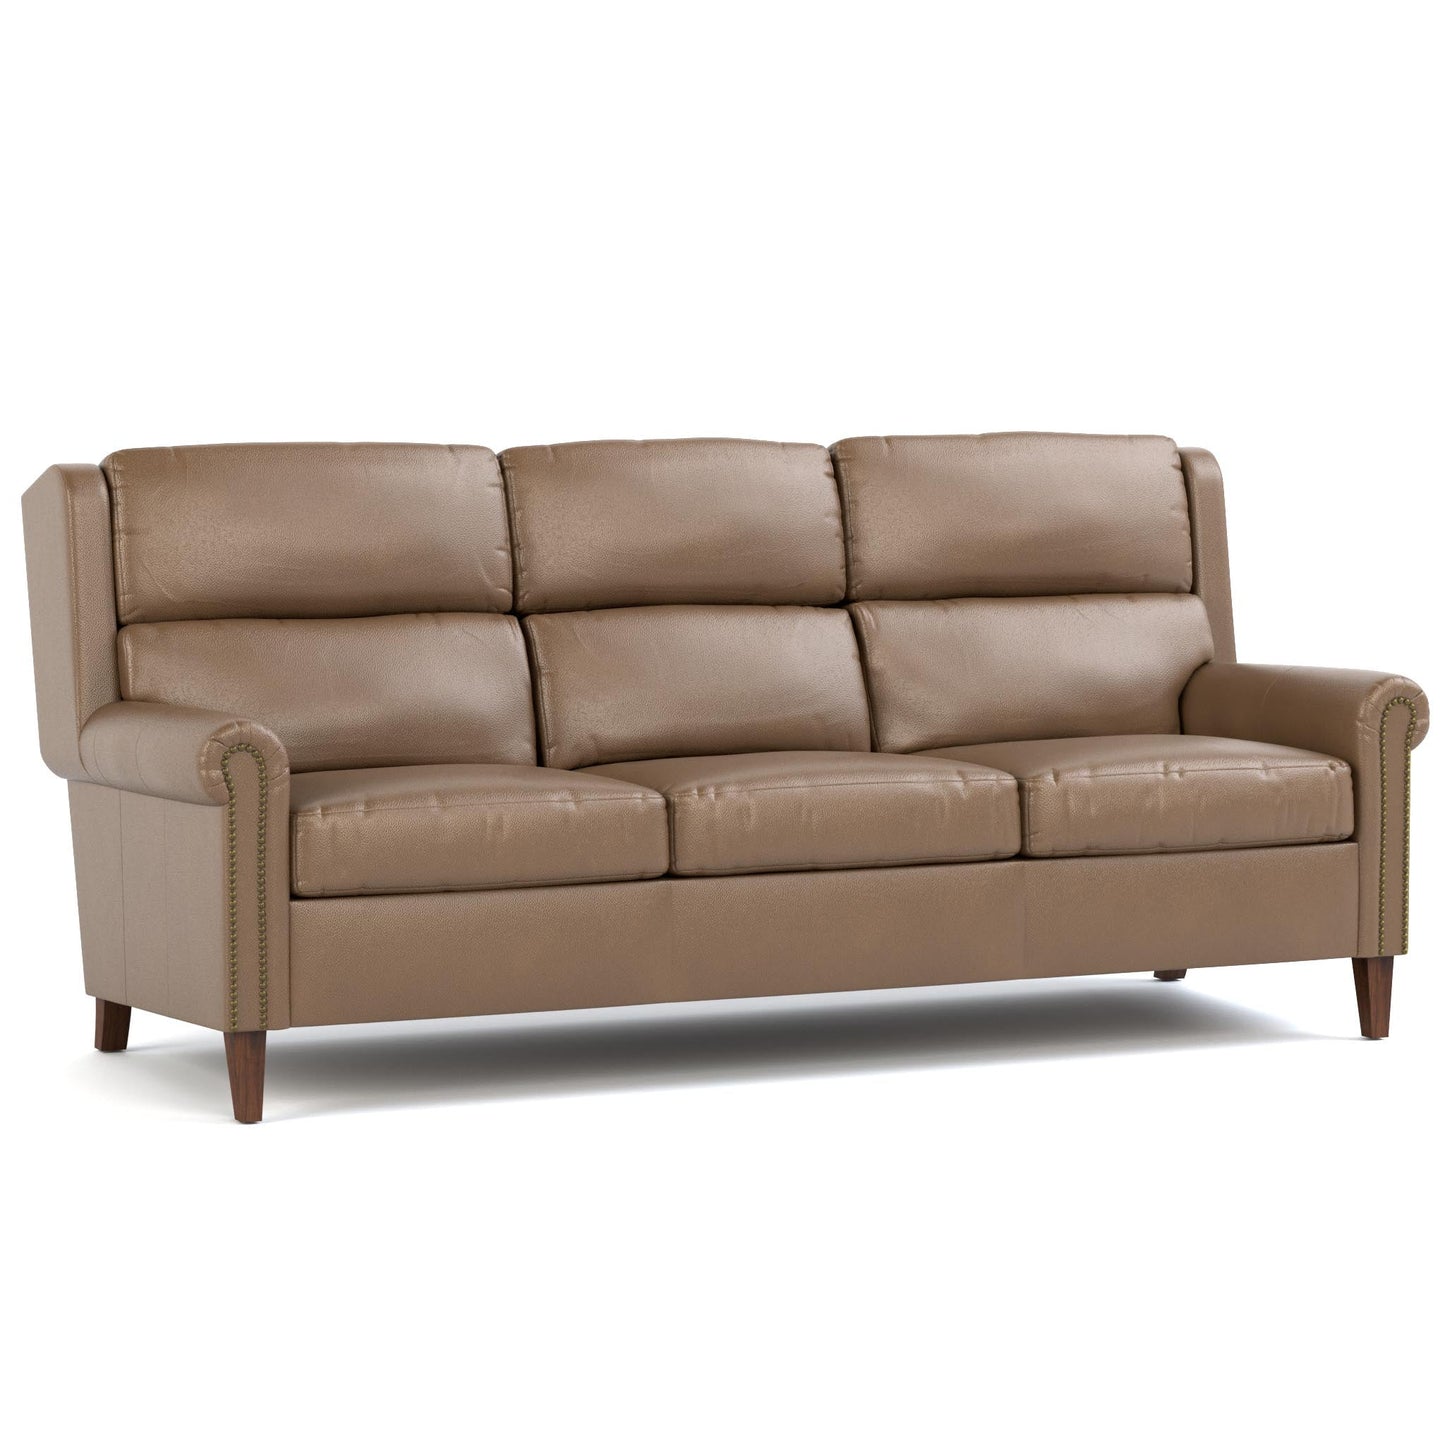 Woodlands Small Roll Arm Sofa with Nails Selvalo Granite Program